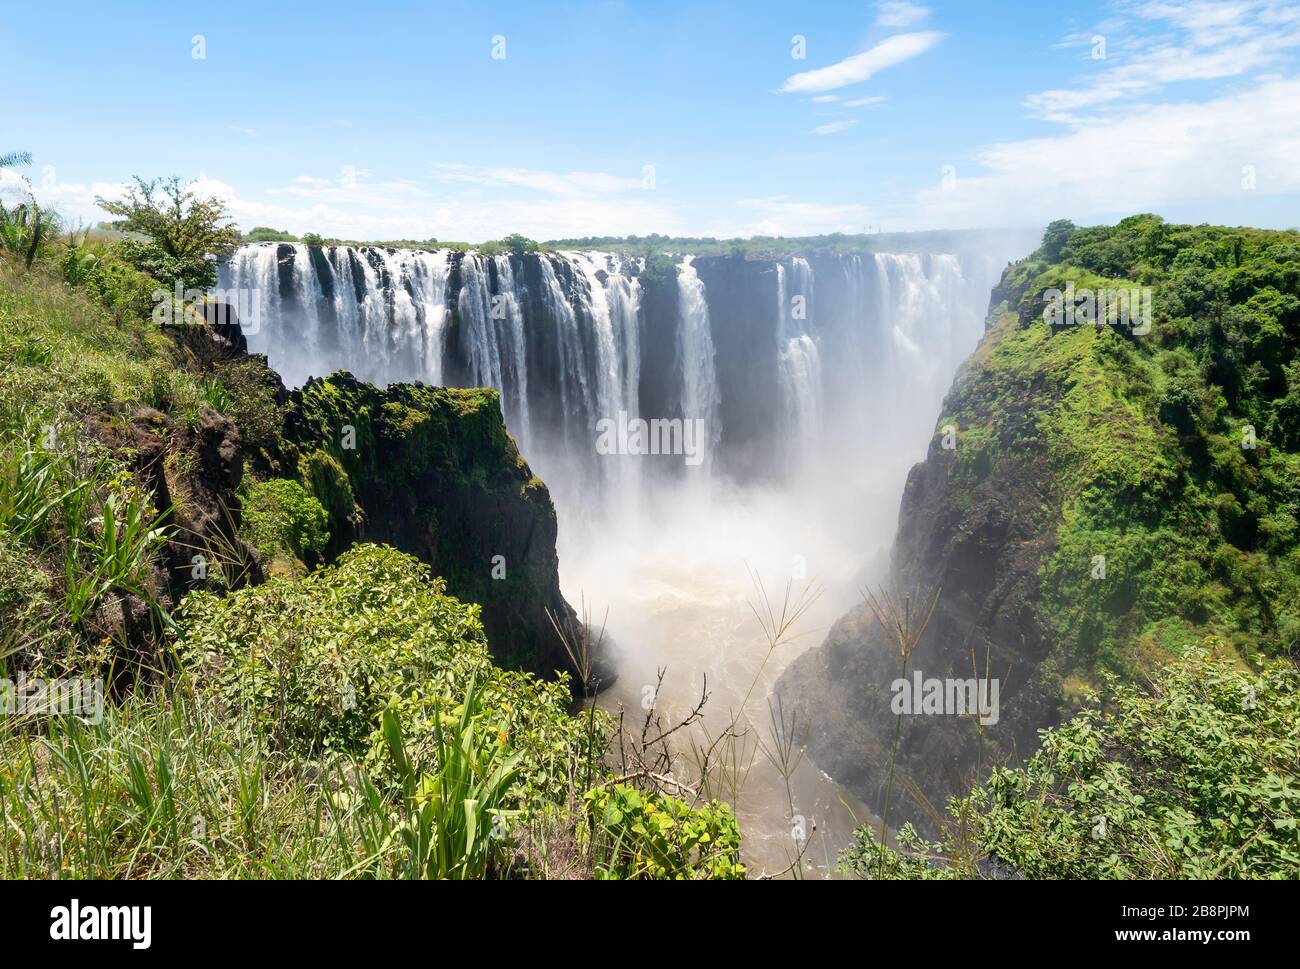 Wide angle view of the beautiful Victoria Falls National Park from Zimbabwe side in Africa continent.  Waterfalls in near the border with Zambia. Stock Photo